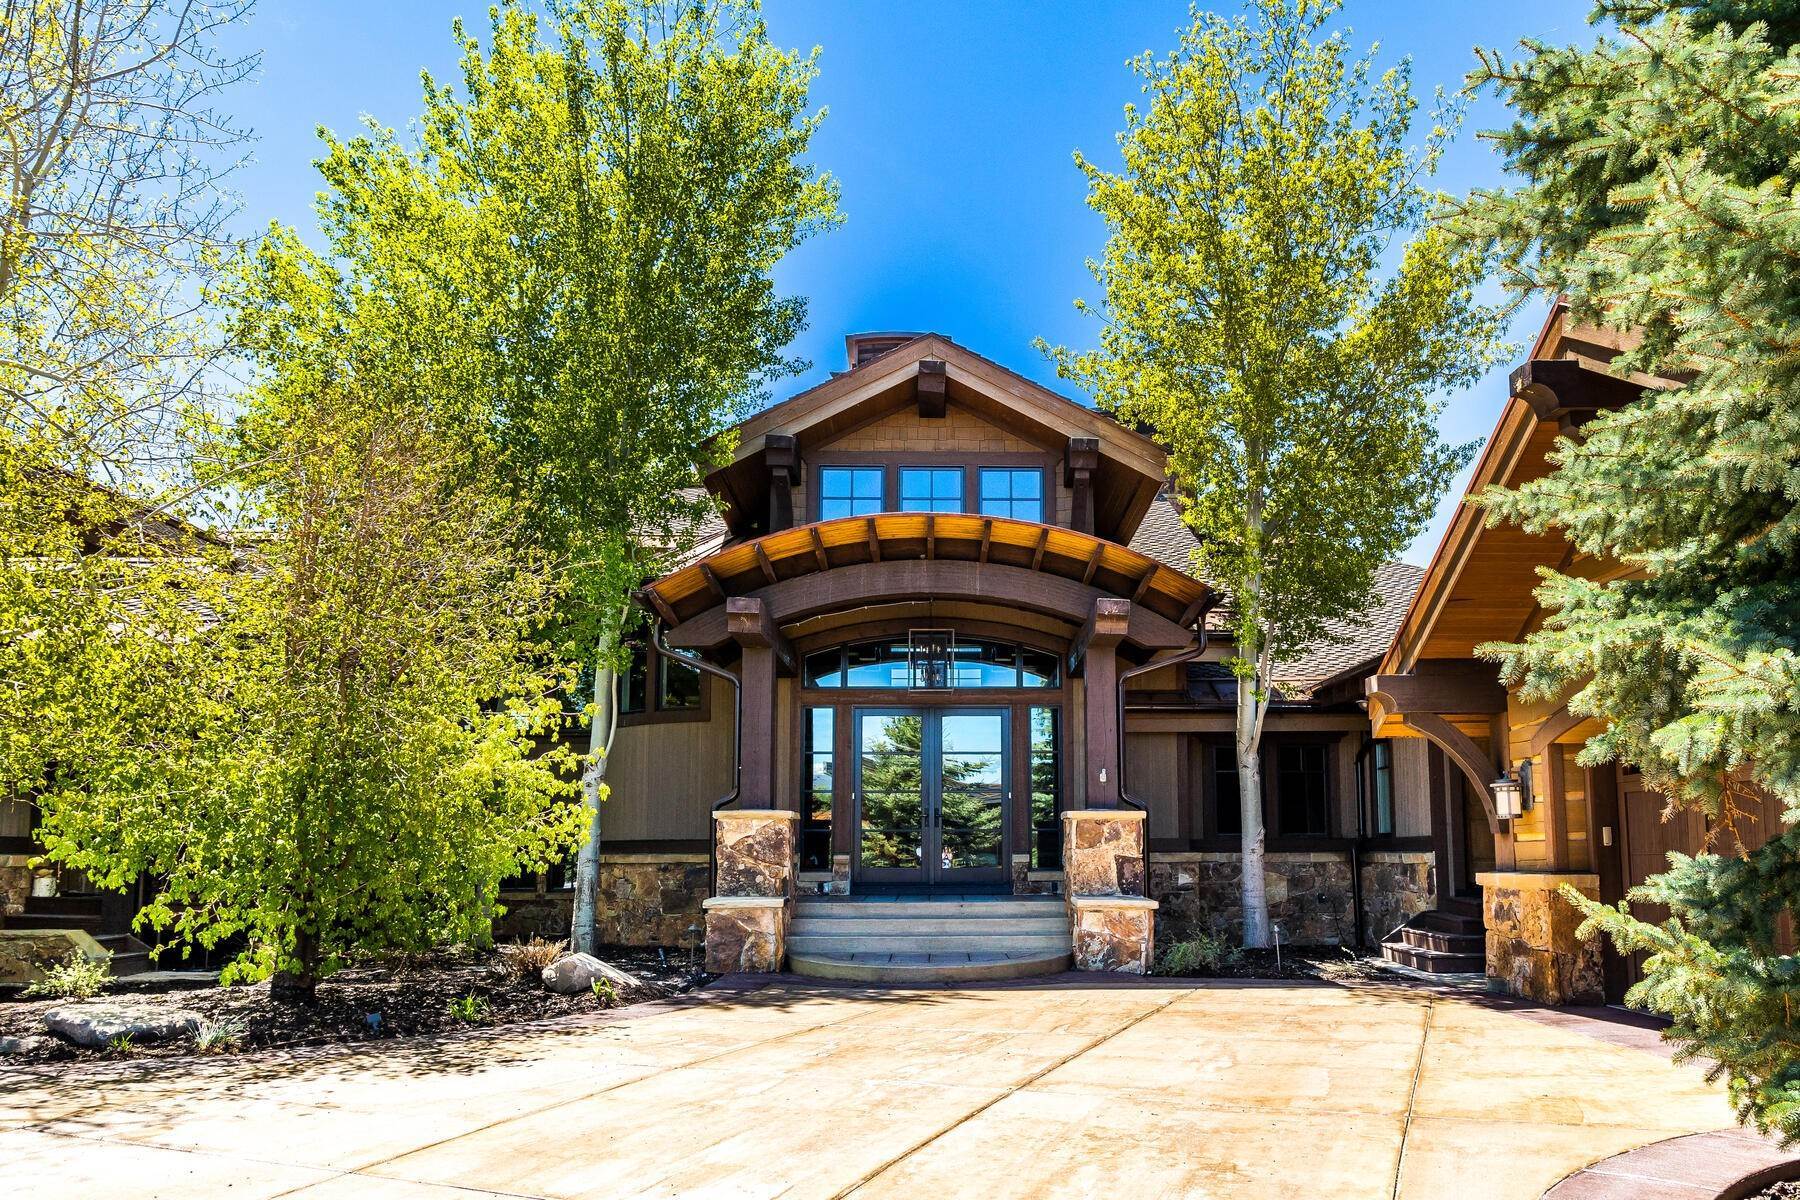 Property for Sale at A beautifully timber designed home located at the southwest edge of Promontory 6068 Dakota Trl Park City, Utah 84098 United States